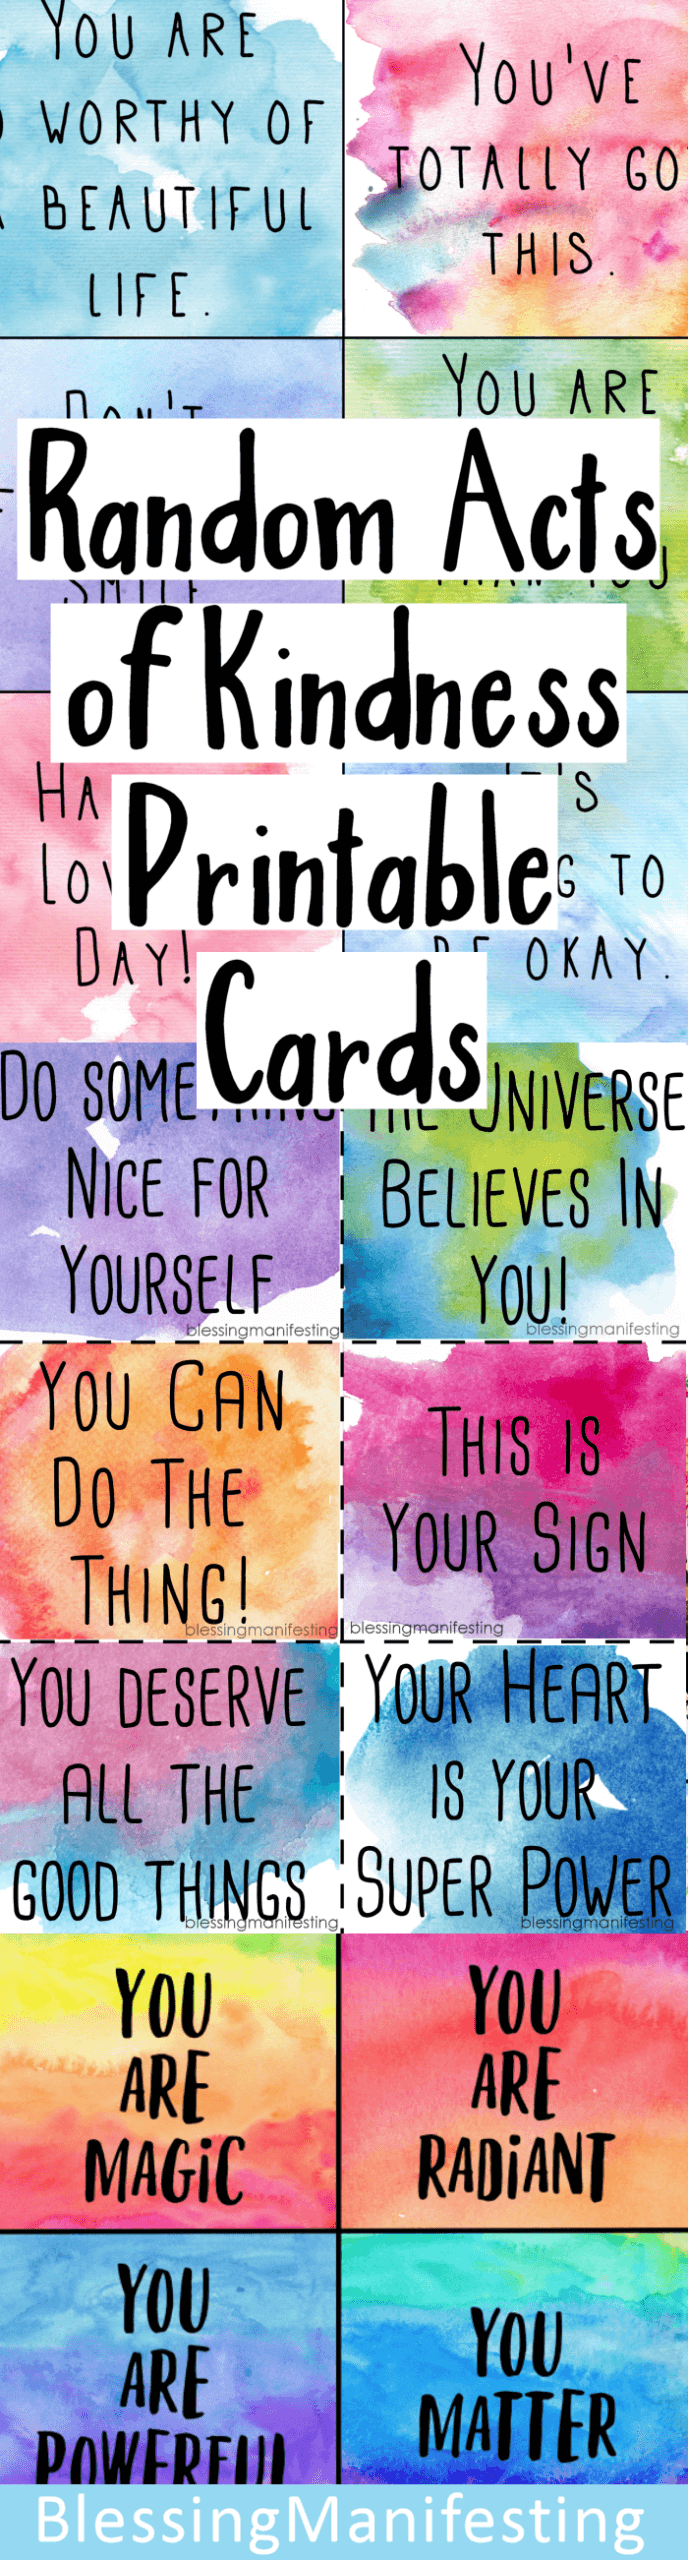 Random Acts Of Kindness Cards Clip Art And Free Templates within